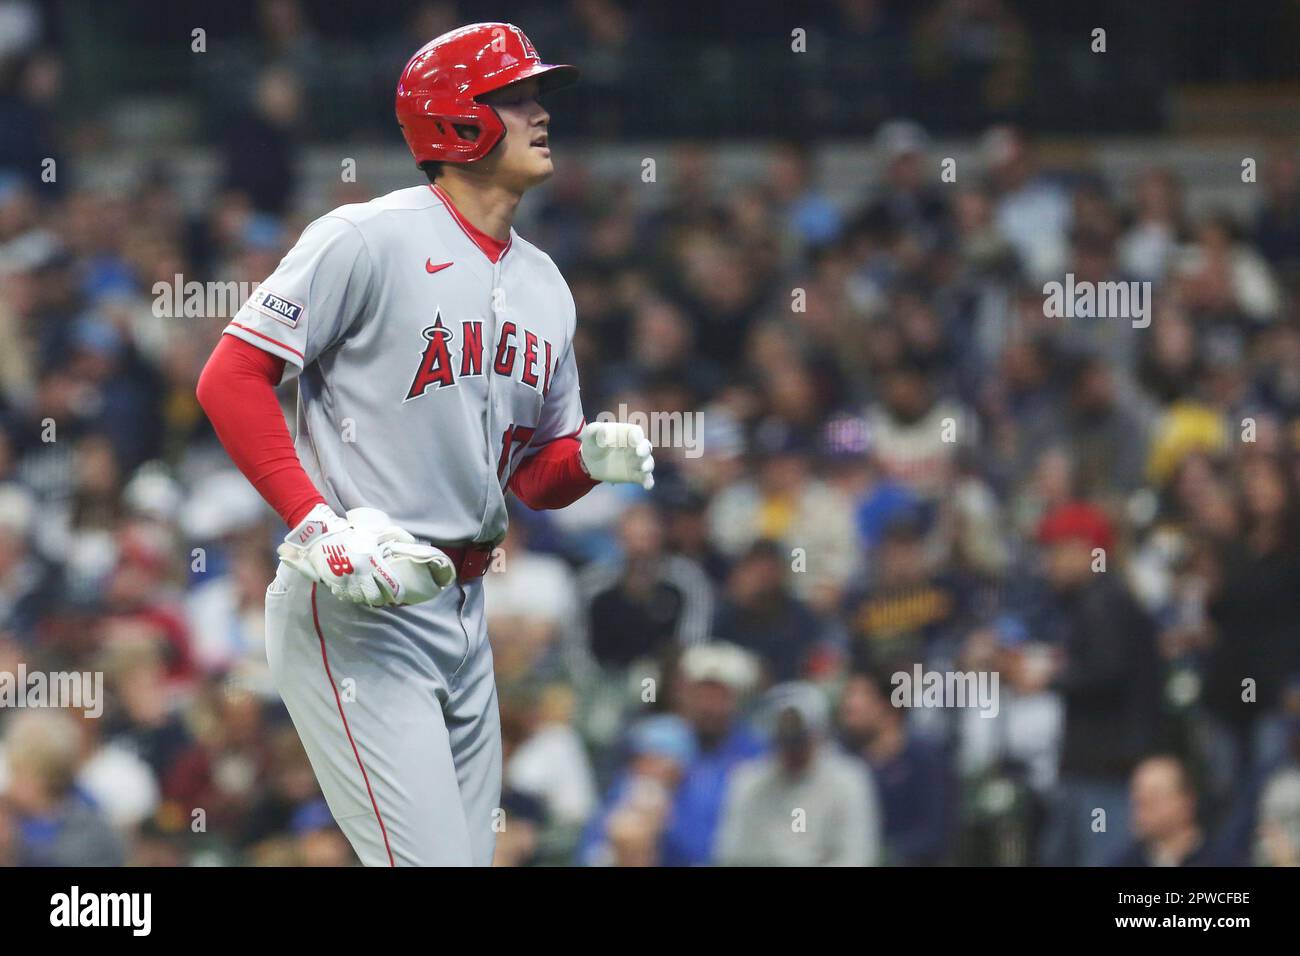 MILWAUKEE, WI - APRIL 29: Los Angeles Angels designated hitter Shohei  Ohtani (17) jogs off the field during a game between the Milwaukee Brewers  and the Los Angeles Angels on April 29